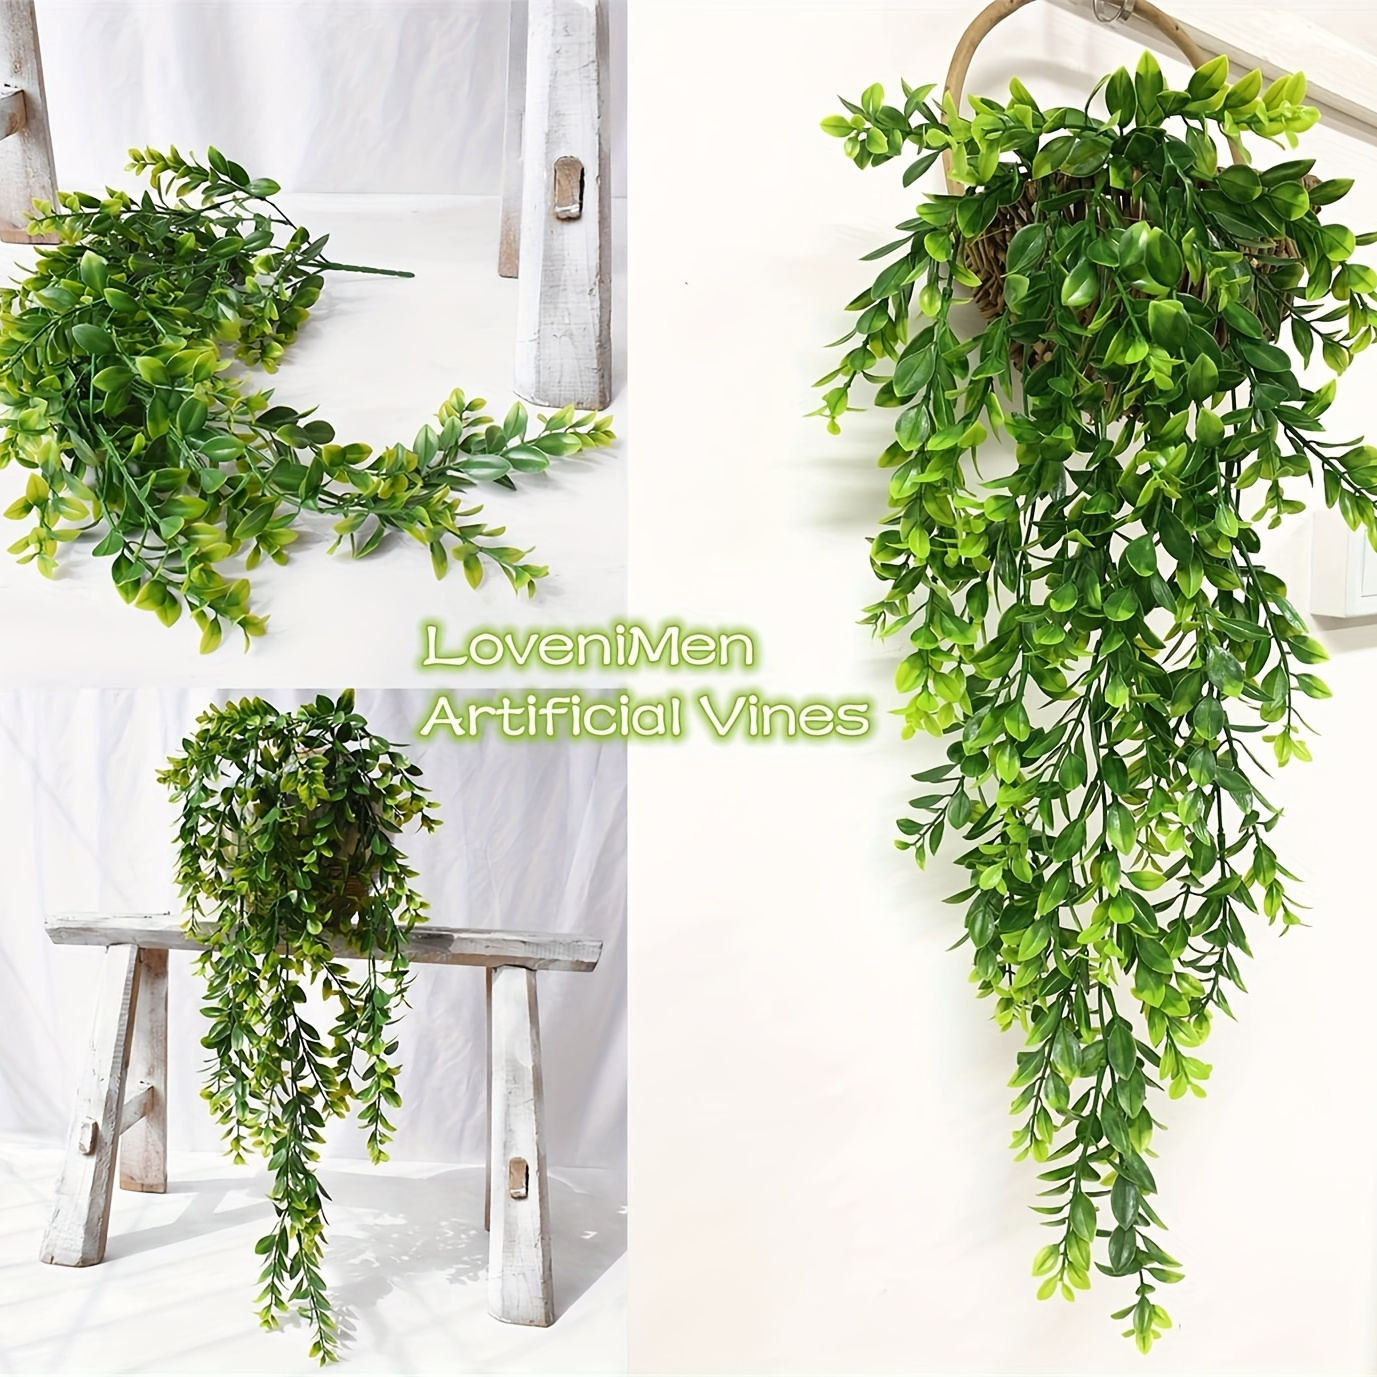 Mightlink 9 Forked Simulation Green Plants Realistic Wall Hanging Fake Vines Ornamental Faux Plant Props Decor for Home Garden, Size: Medium